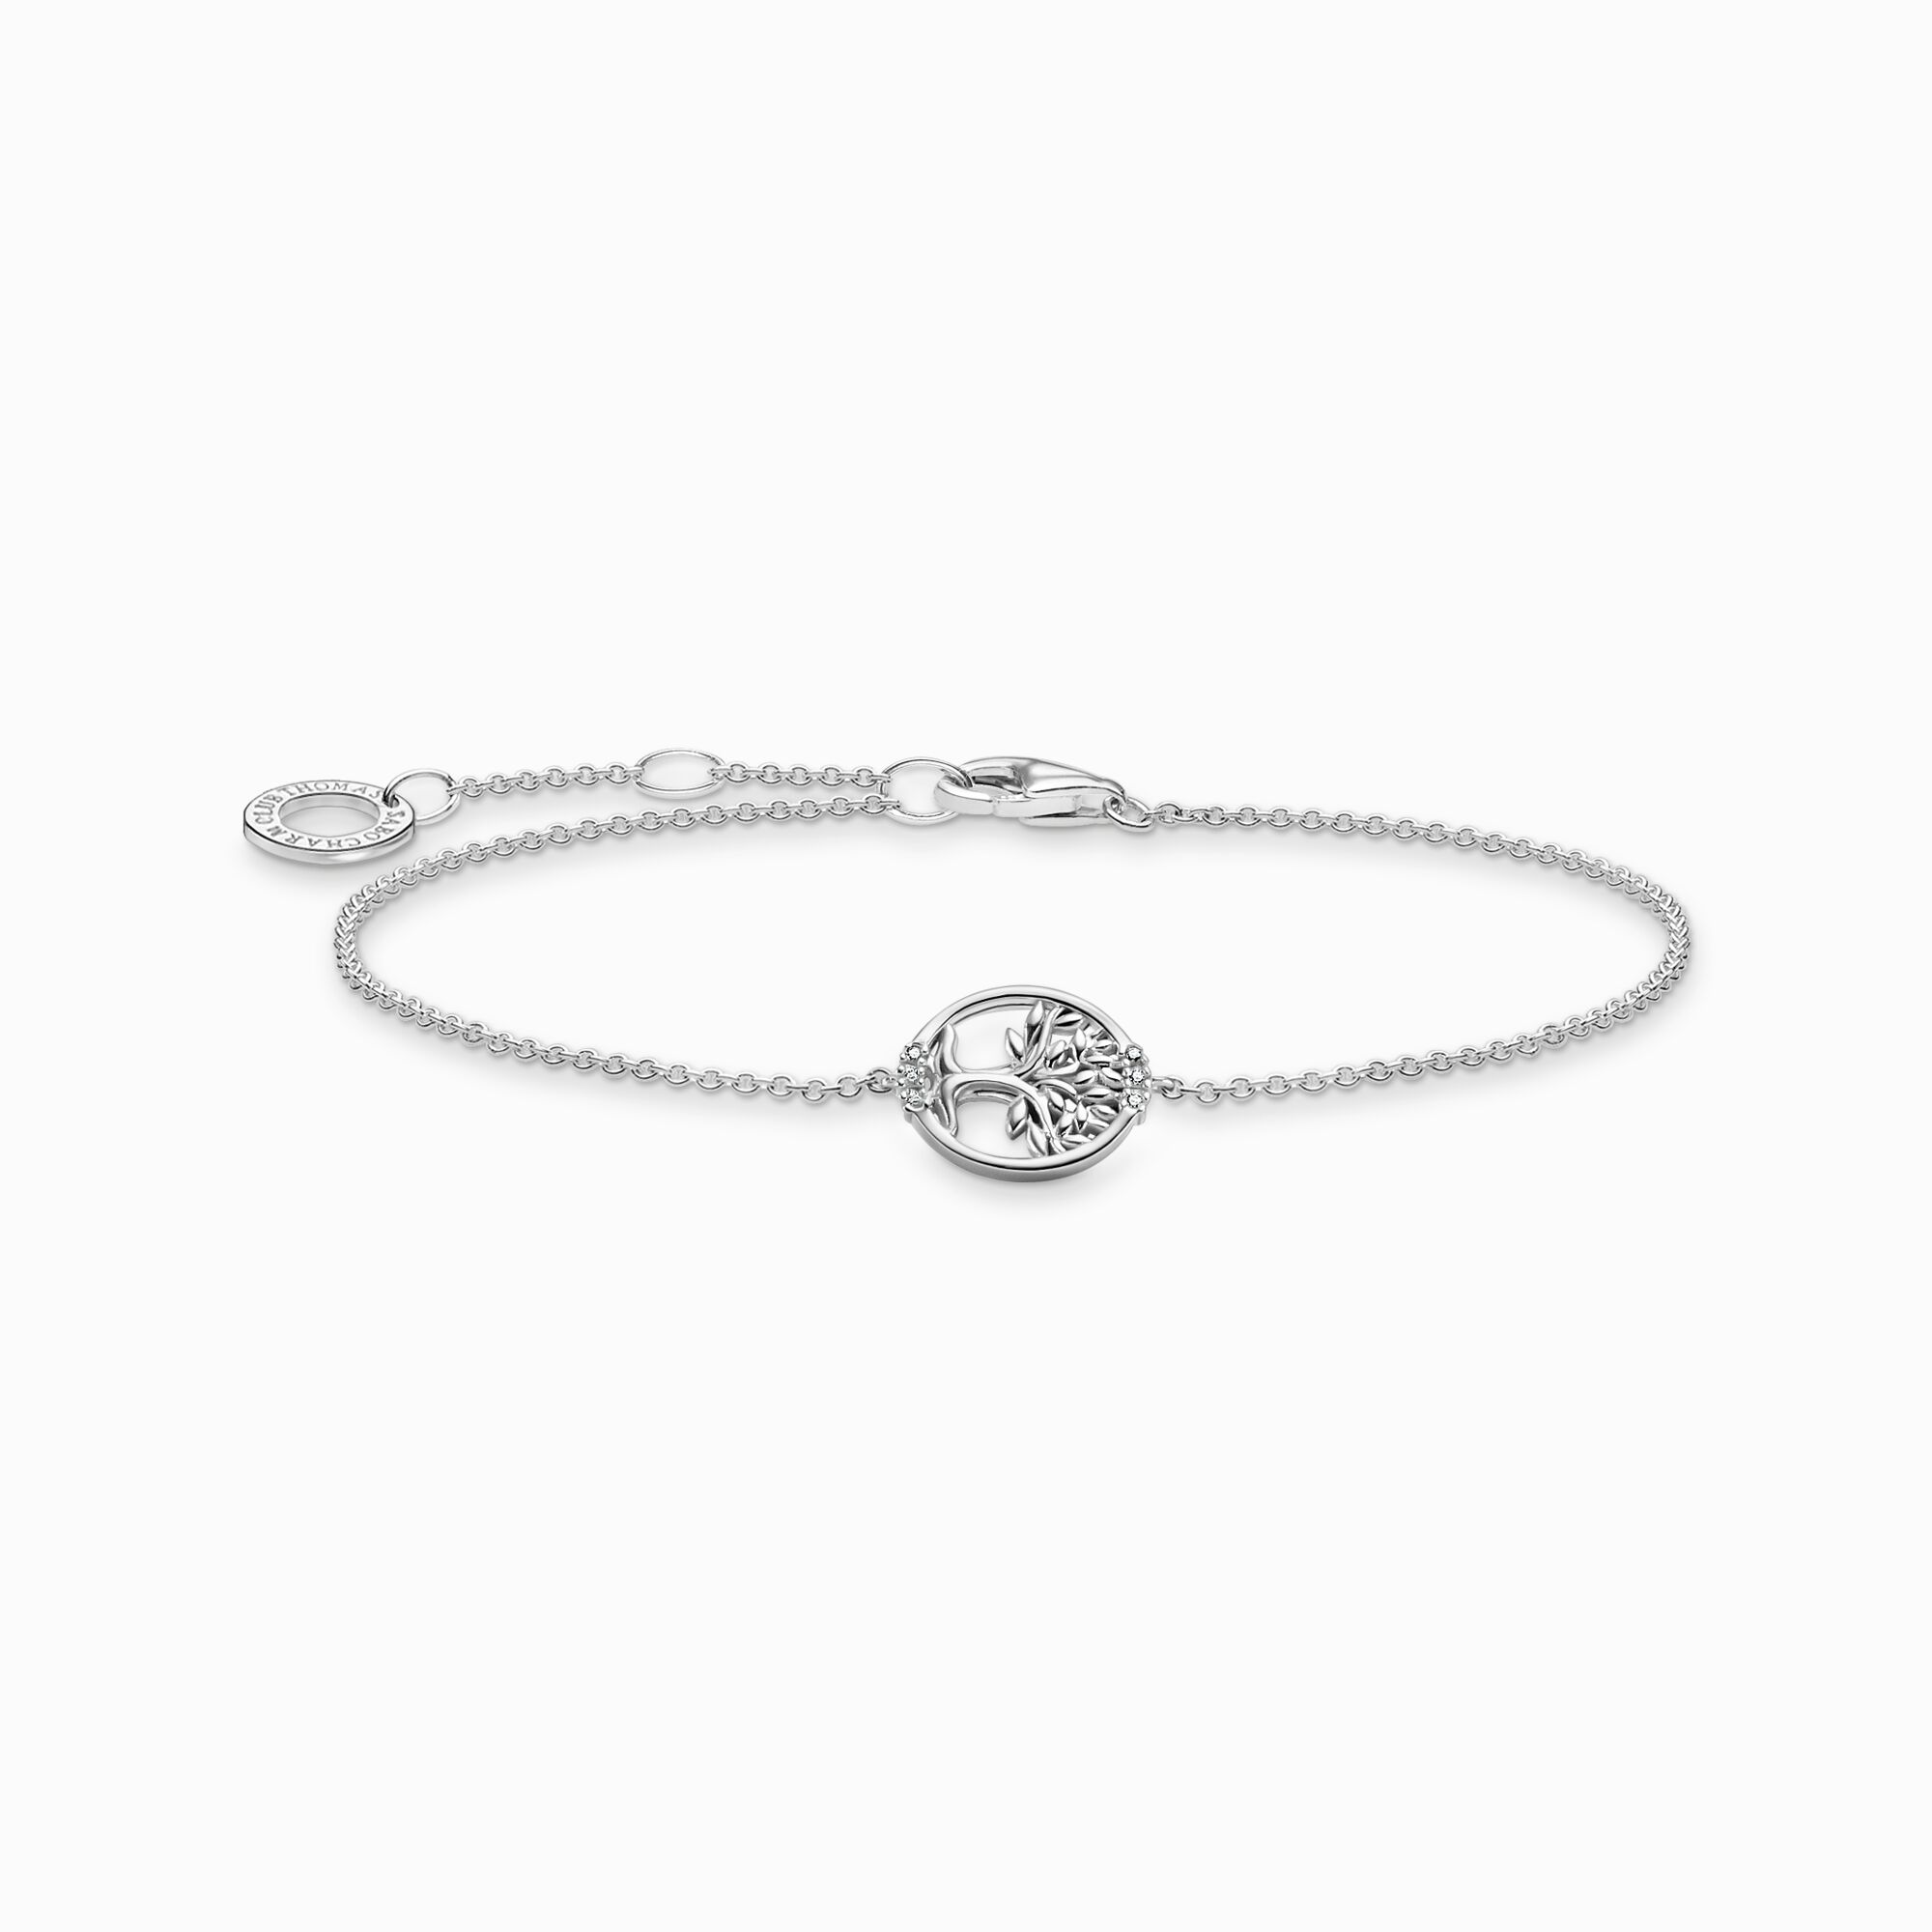 Bracelet Tree of Love with white stones silver from the Charming Collection collection in the THOMAS SABO online store